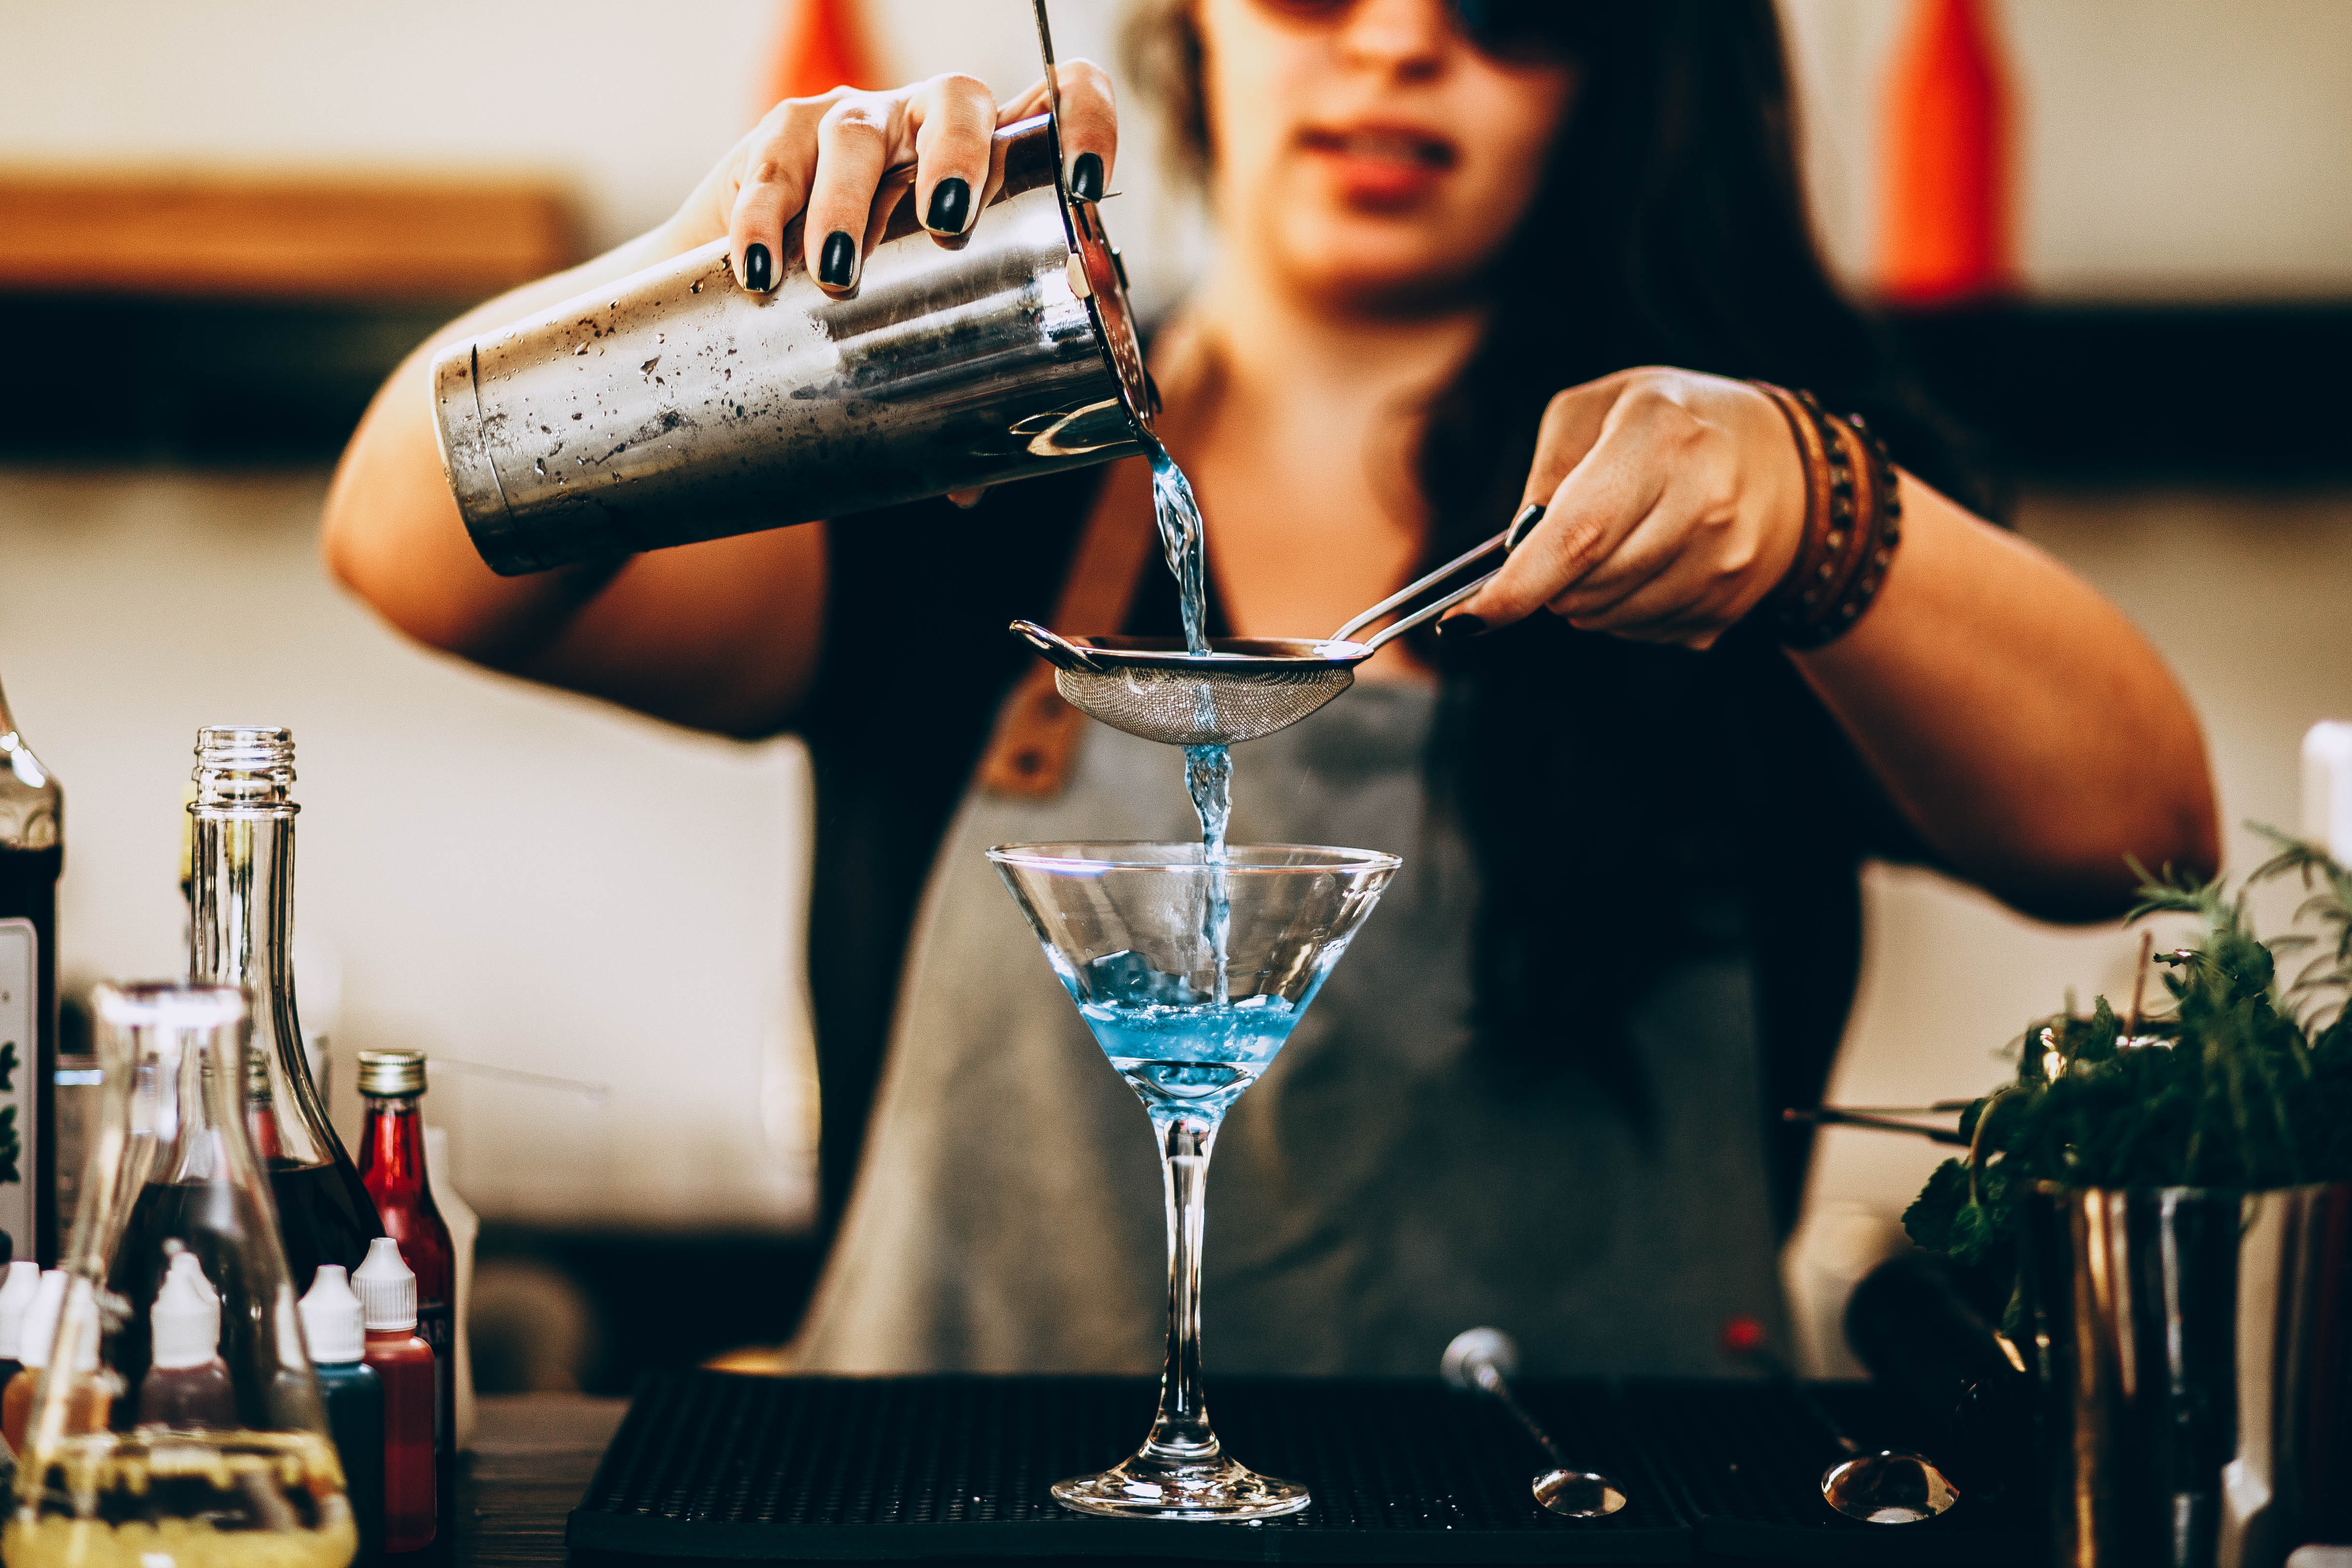 Woman pouring liquid from drink mixer | Source: Pexels